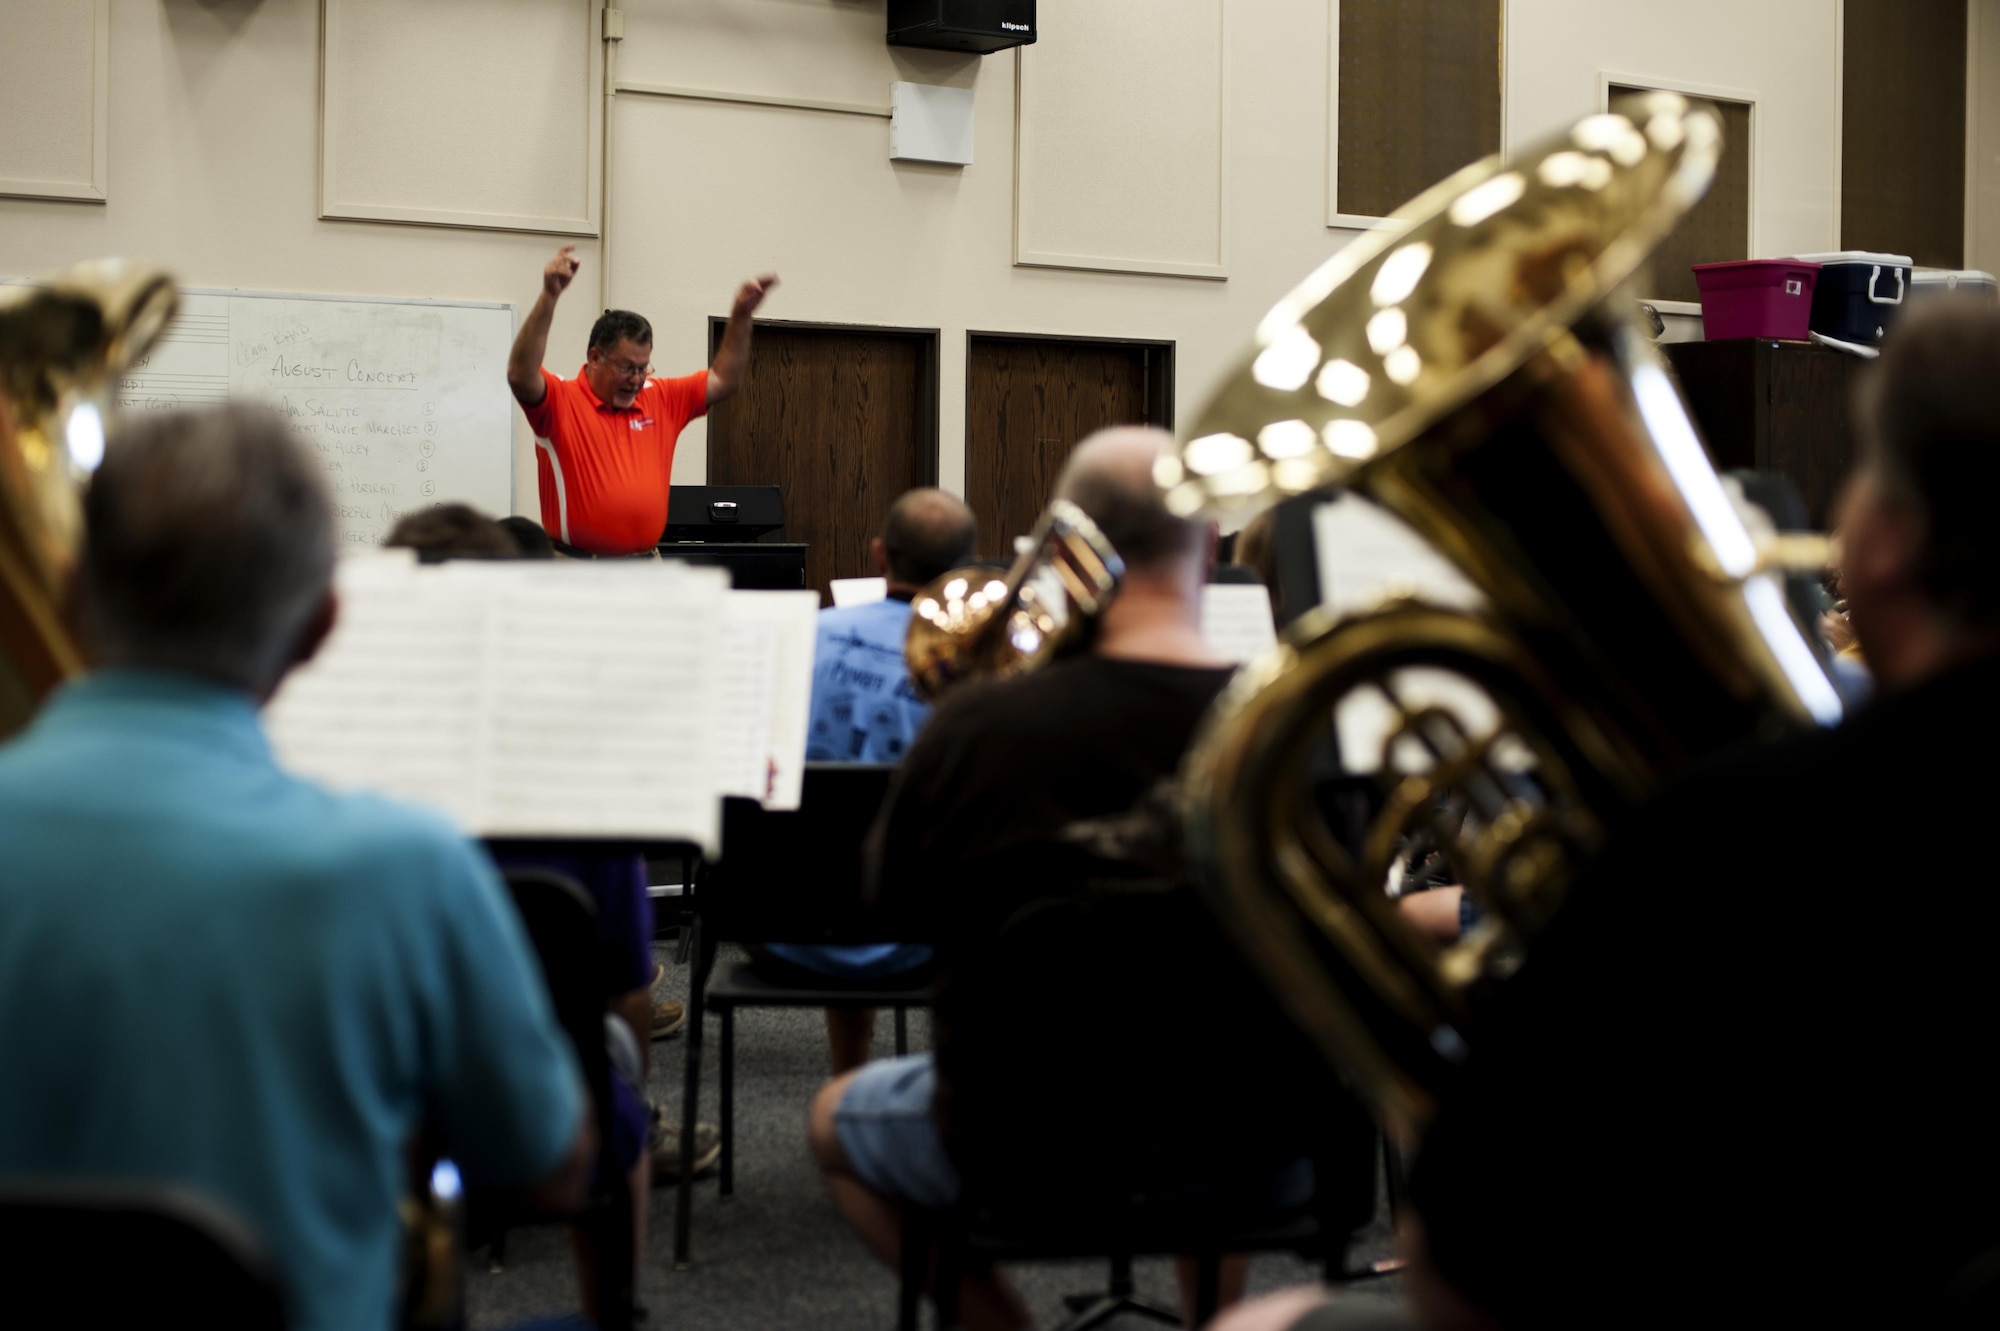 Dr. David Phillips, Central High School band director, conducts the San Angelo Community Band during band practice in the band hall at Angelo State University, San Angelo, Texas, July 28, 2015. The band meets to practice every Tuesday for weeks leading up to their events. (U.S. Air Force photo by Scott Jackson/Released)